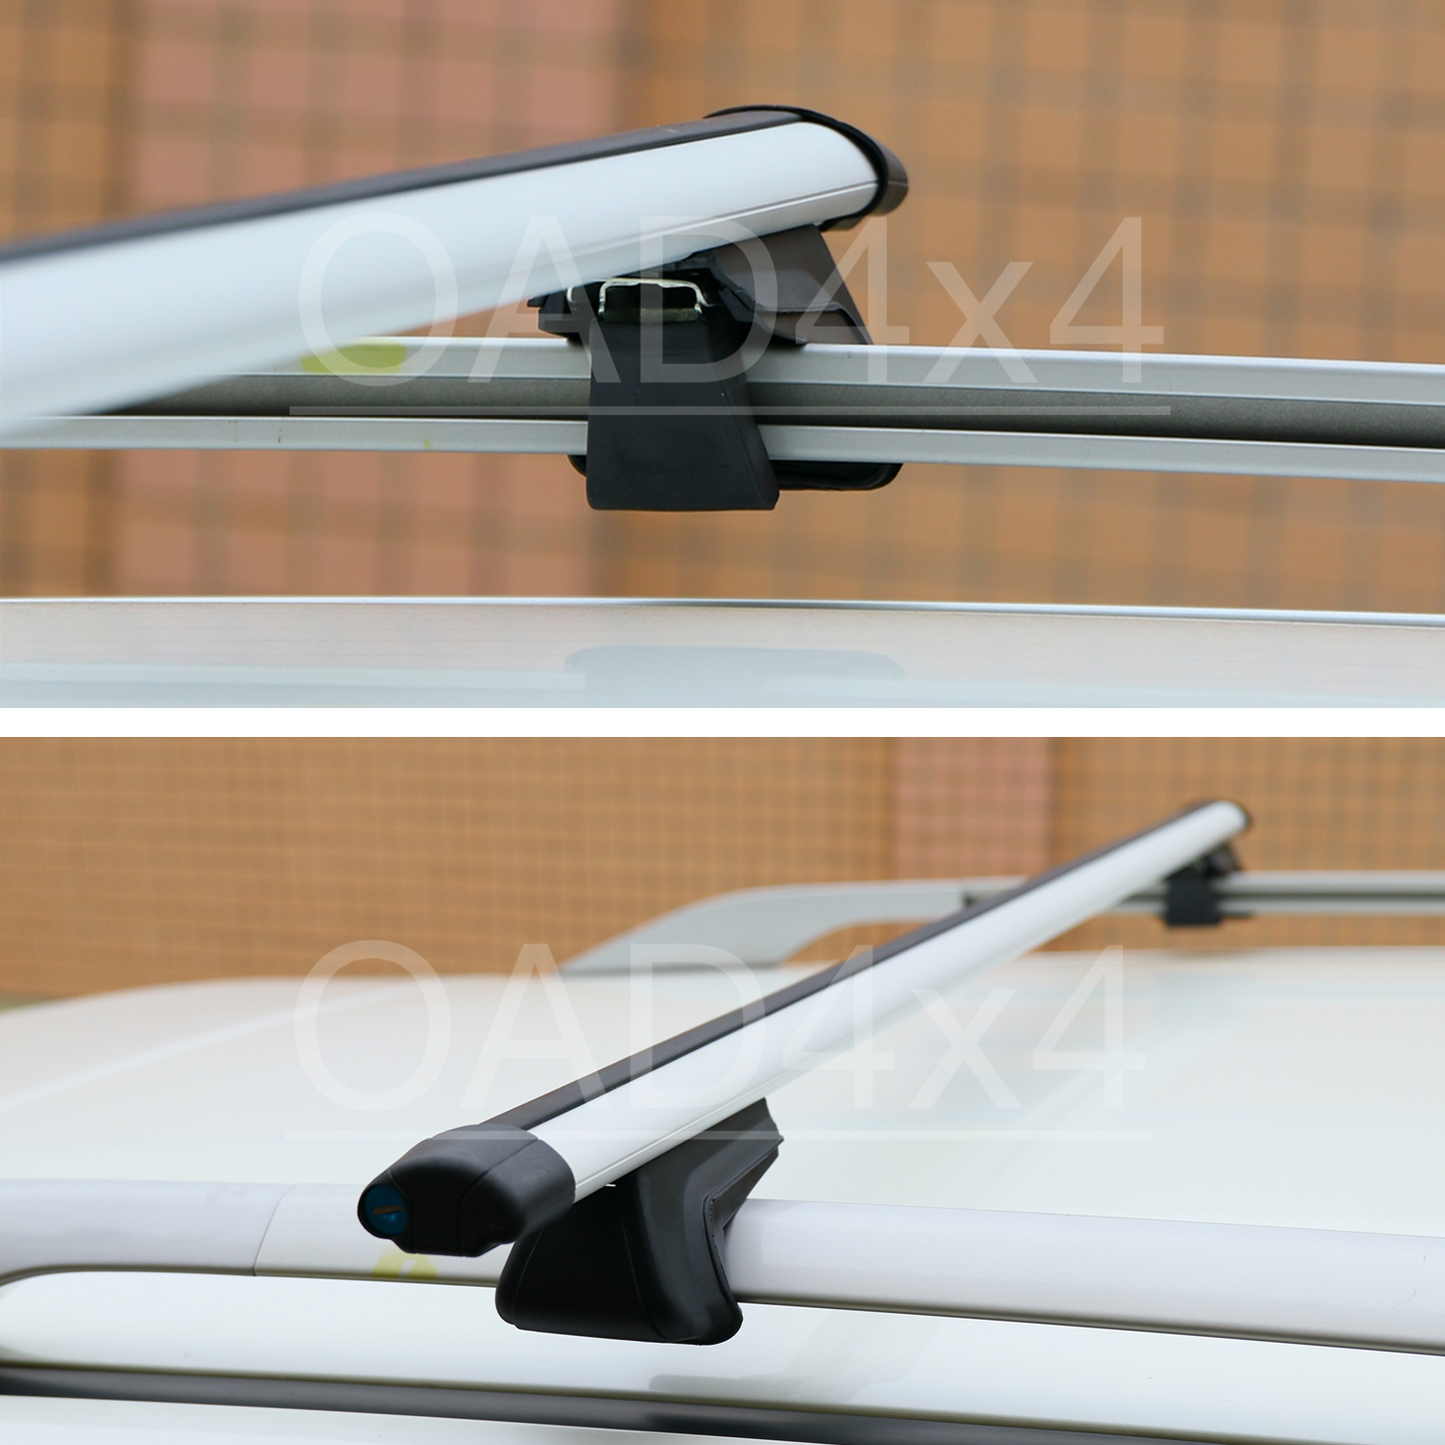 1 Pair Aluminum Silver Cross Bar Roof Racks Baggage holder for Volkswagen Golf Wagon 07-18 with raised roof rail